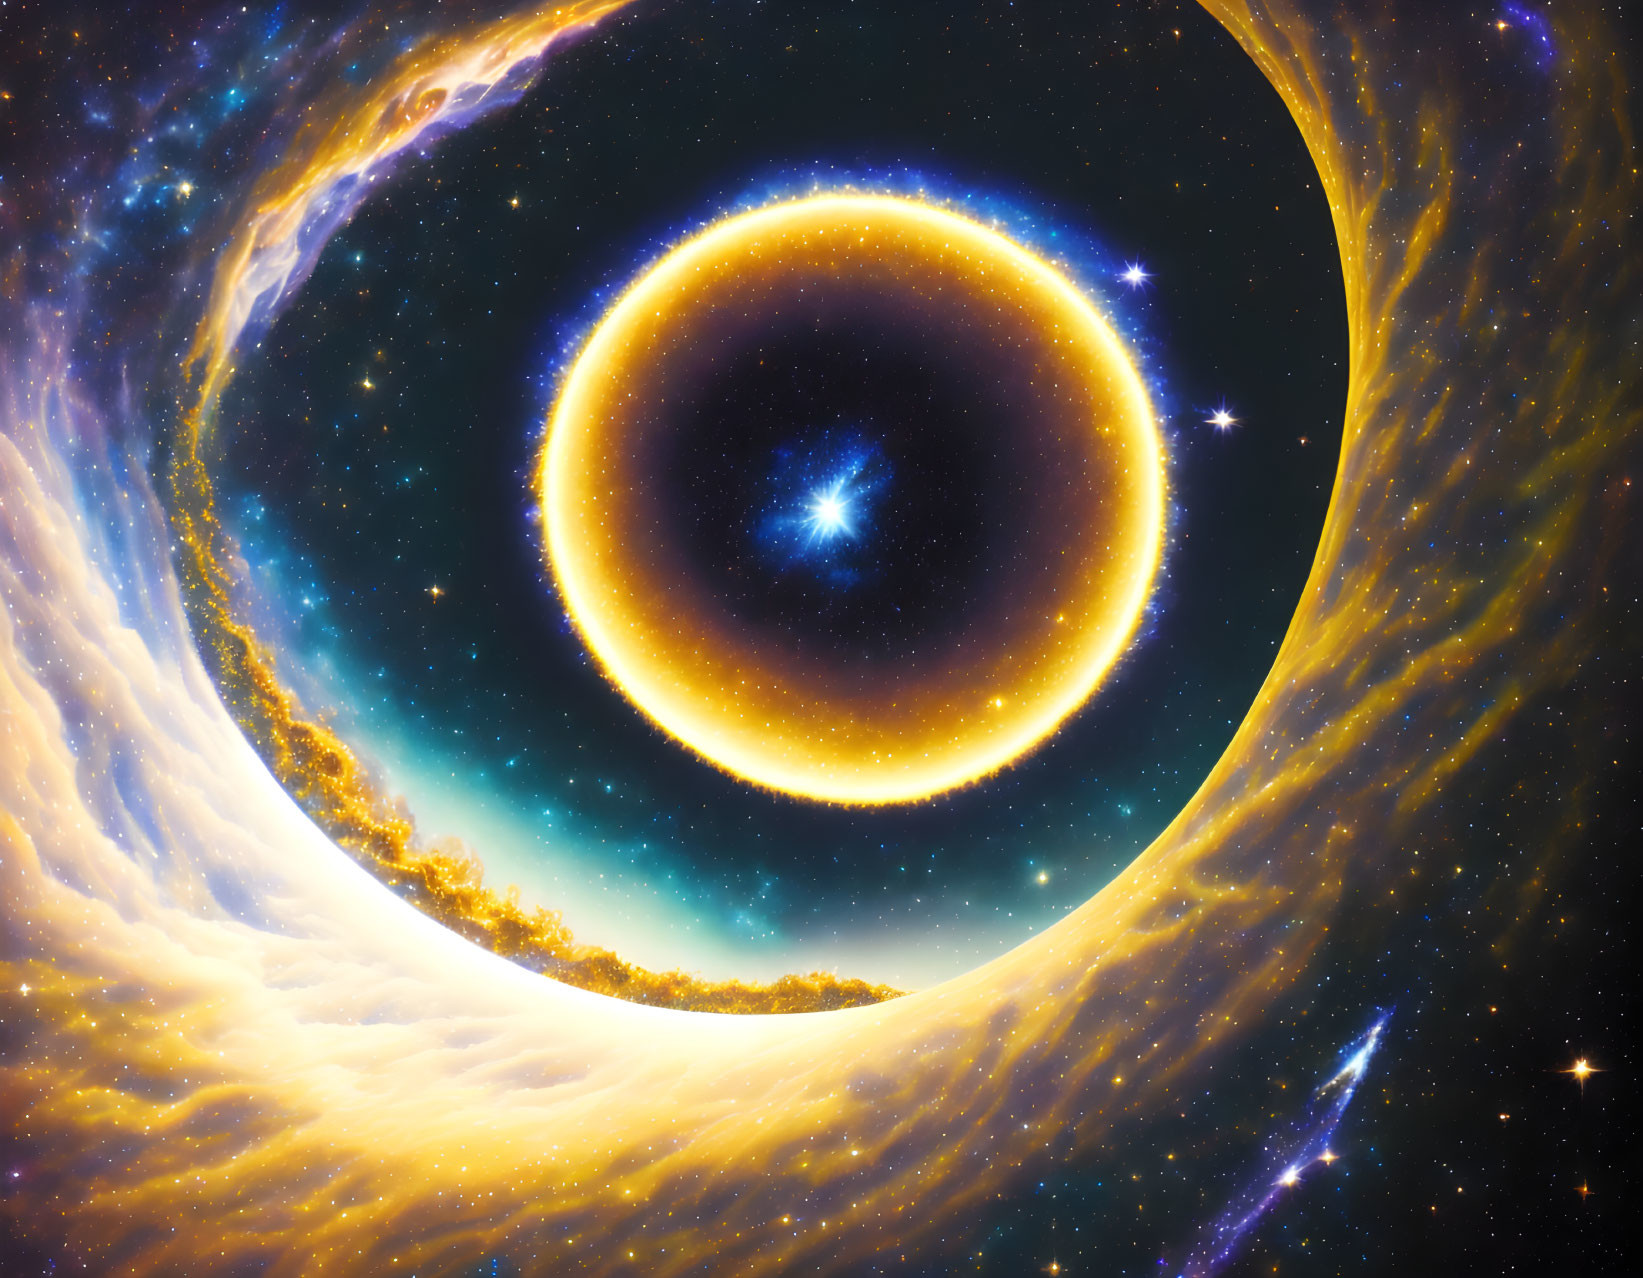 Cosmic scene with black hole, accretion disk, and stars in nebulous space